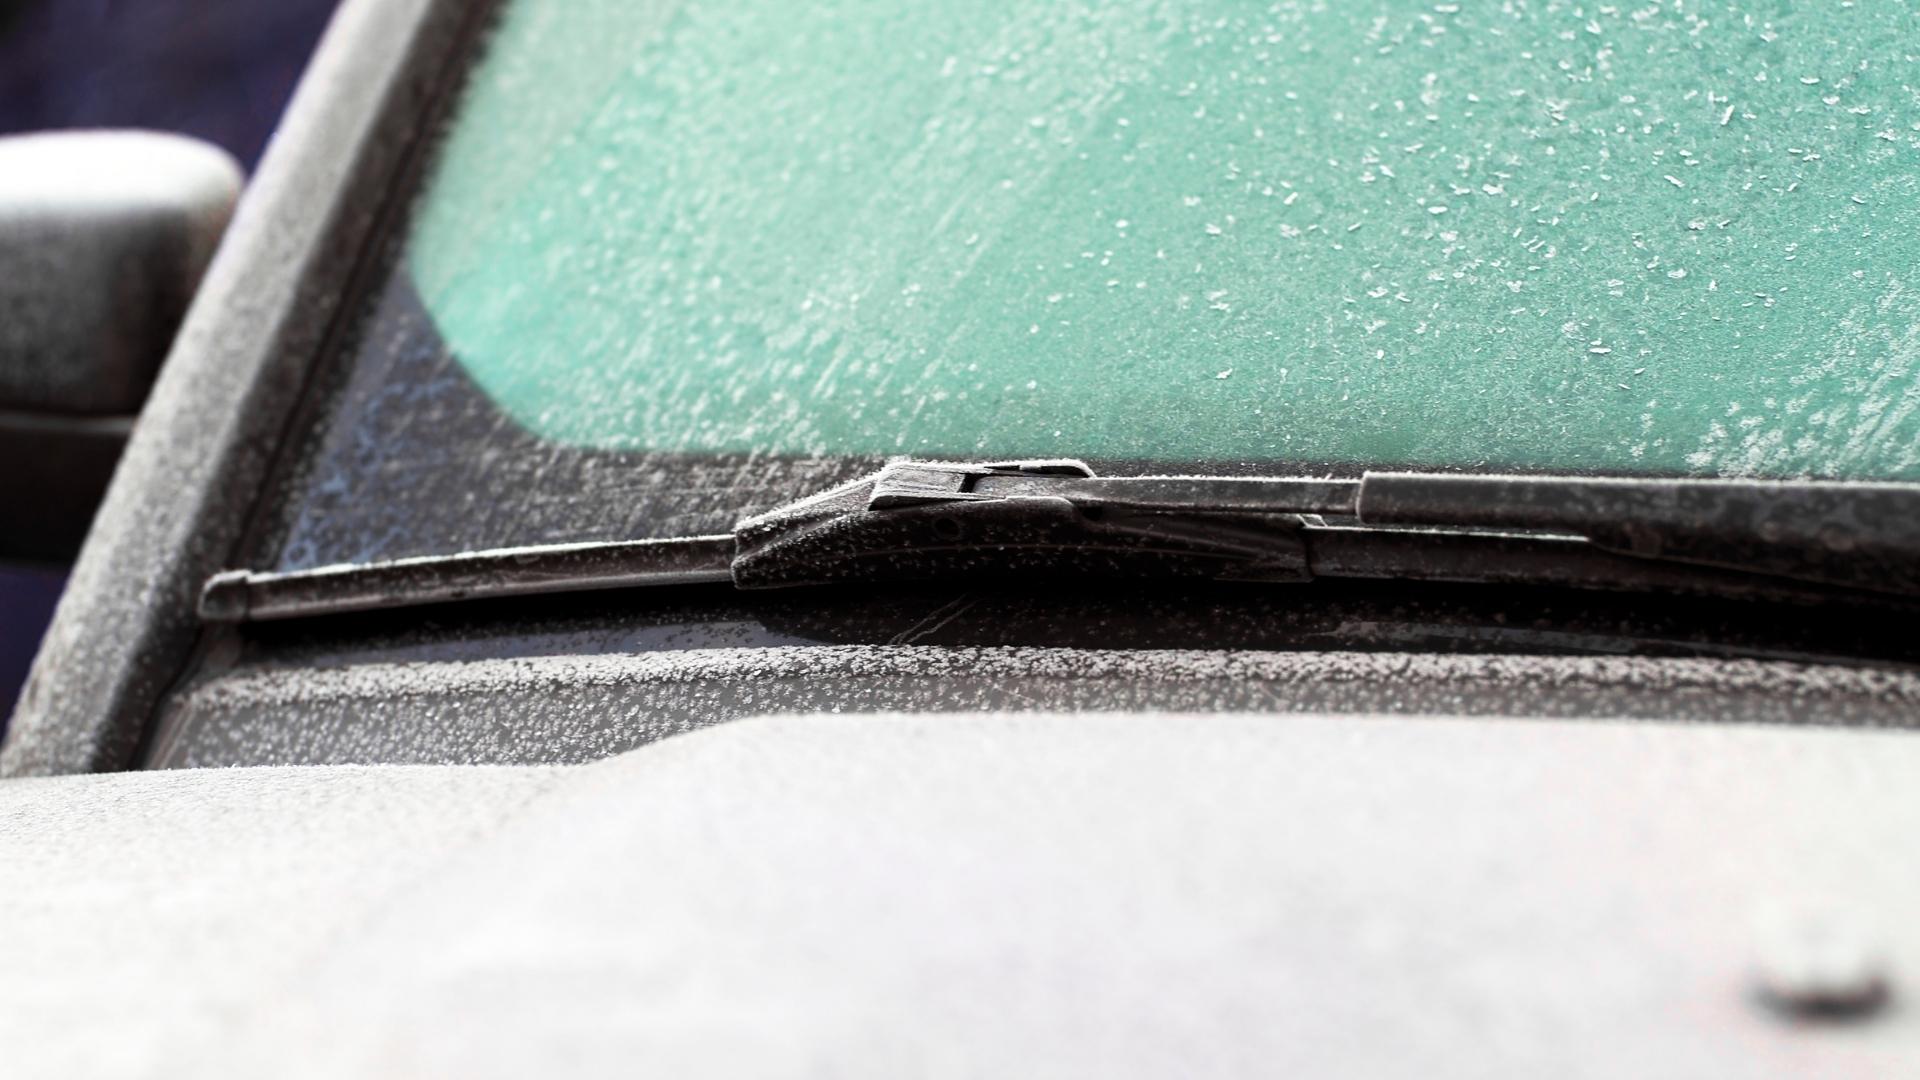 Close up photo on completely iced car's windshield, wiper blade is also covered with ice. Big image